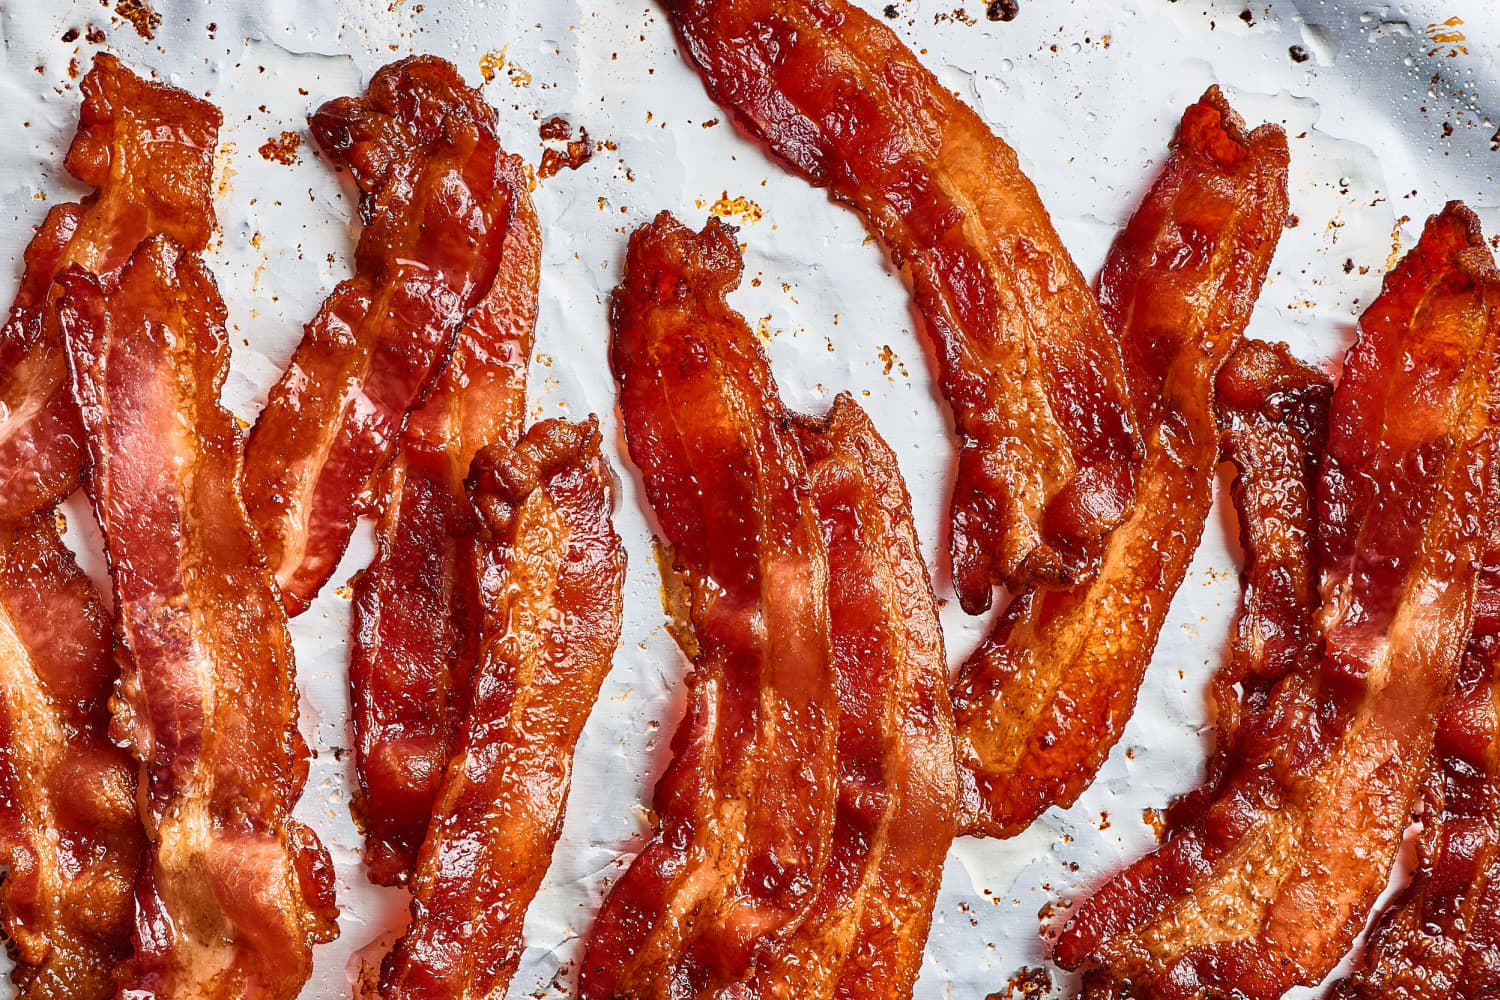 The Best Bacon I’ve Ever Tasted In My Entire Life Is from Pigs Raised on … Leftover Lifesavers and Country Music?!